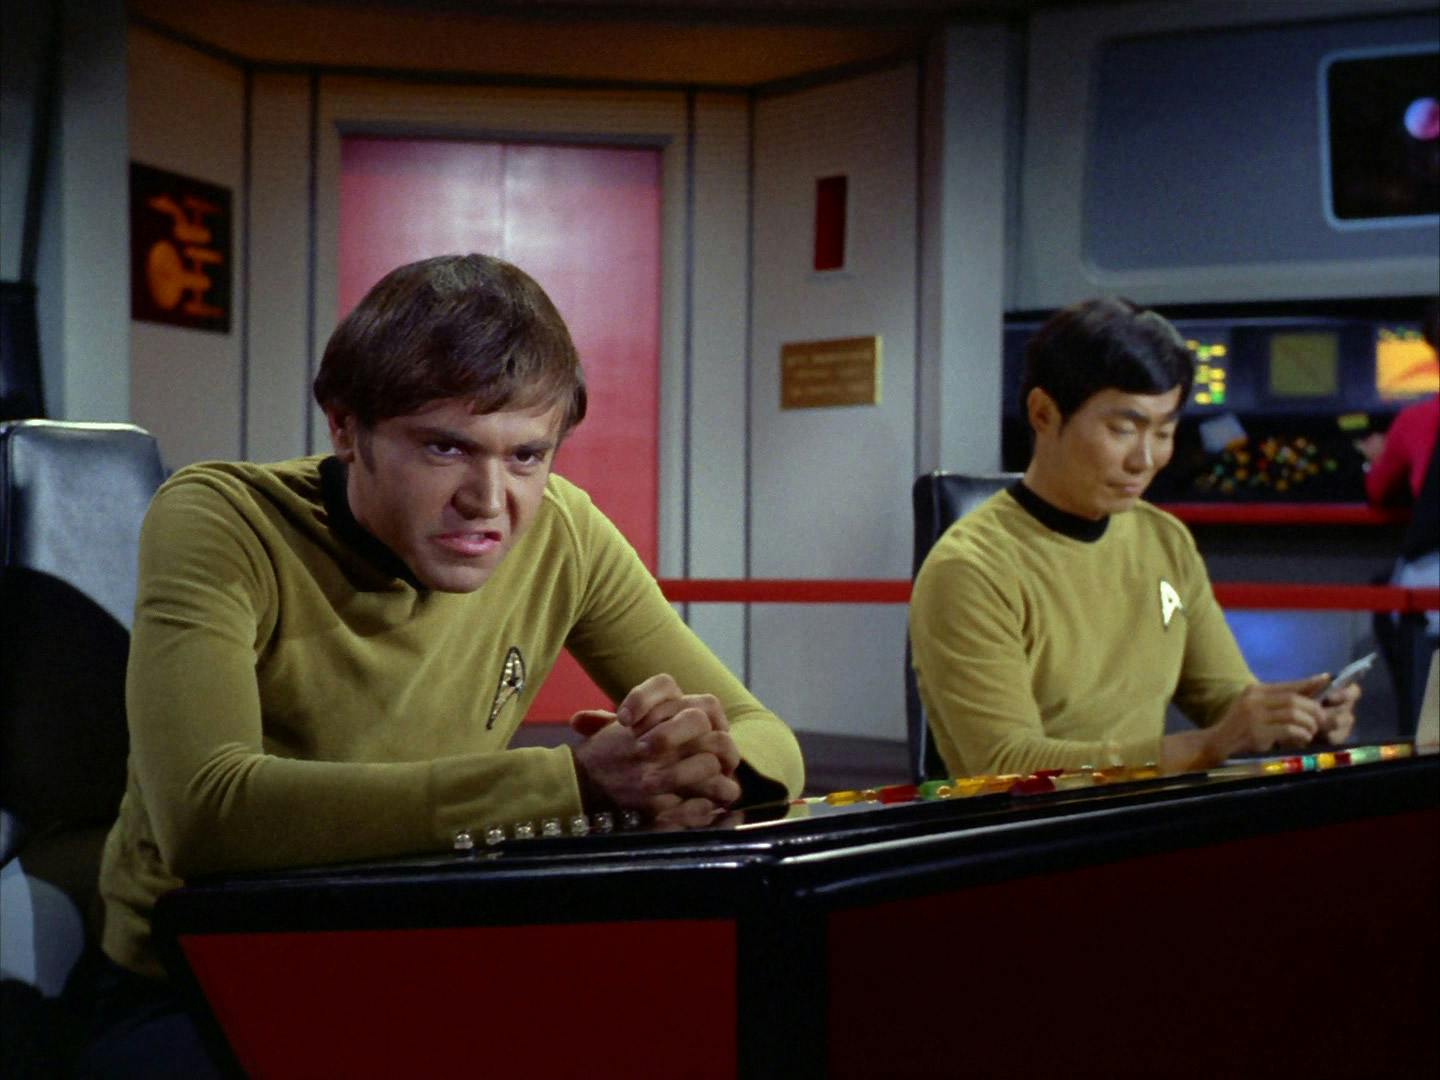 Chekov grouses at his station for being prodded so many times for McCoy's tests while Sulu finds its amusing while sitting next to him in 'The Deadly Years'